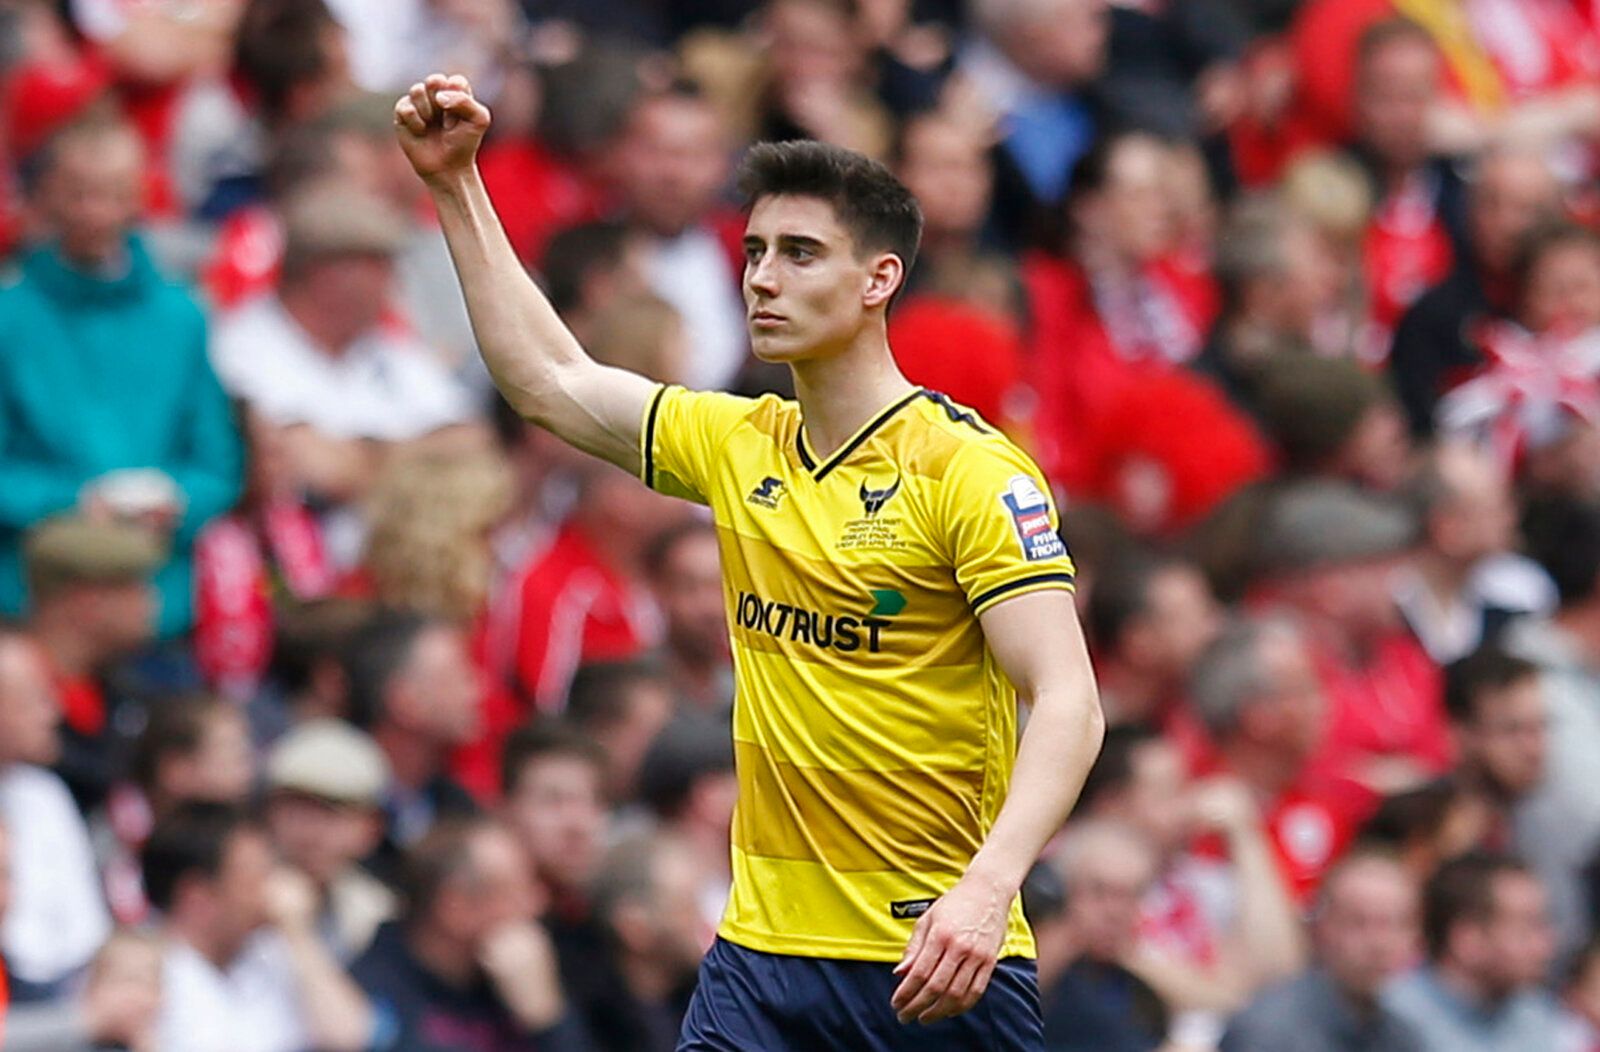 Football Soccer - Barnsley v Oxford United - Johnstone's Paint Trophy Final - Wembley Stadium - 3/4/16
Oxford's Callum O'Dowda celebrates scoring their first goal
Mandatory Credit: Action Images / Paul Childs
Livepic
EDITORIAL USE ONLY. No use with unauthorized audio, video, data, fixture lists, club/league logos or 